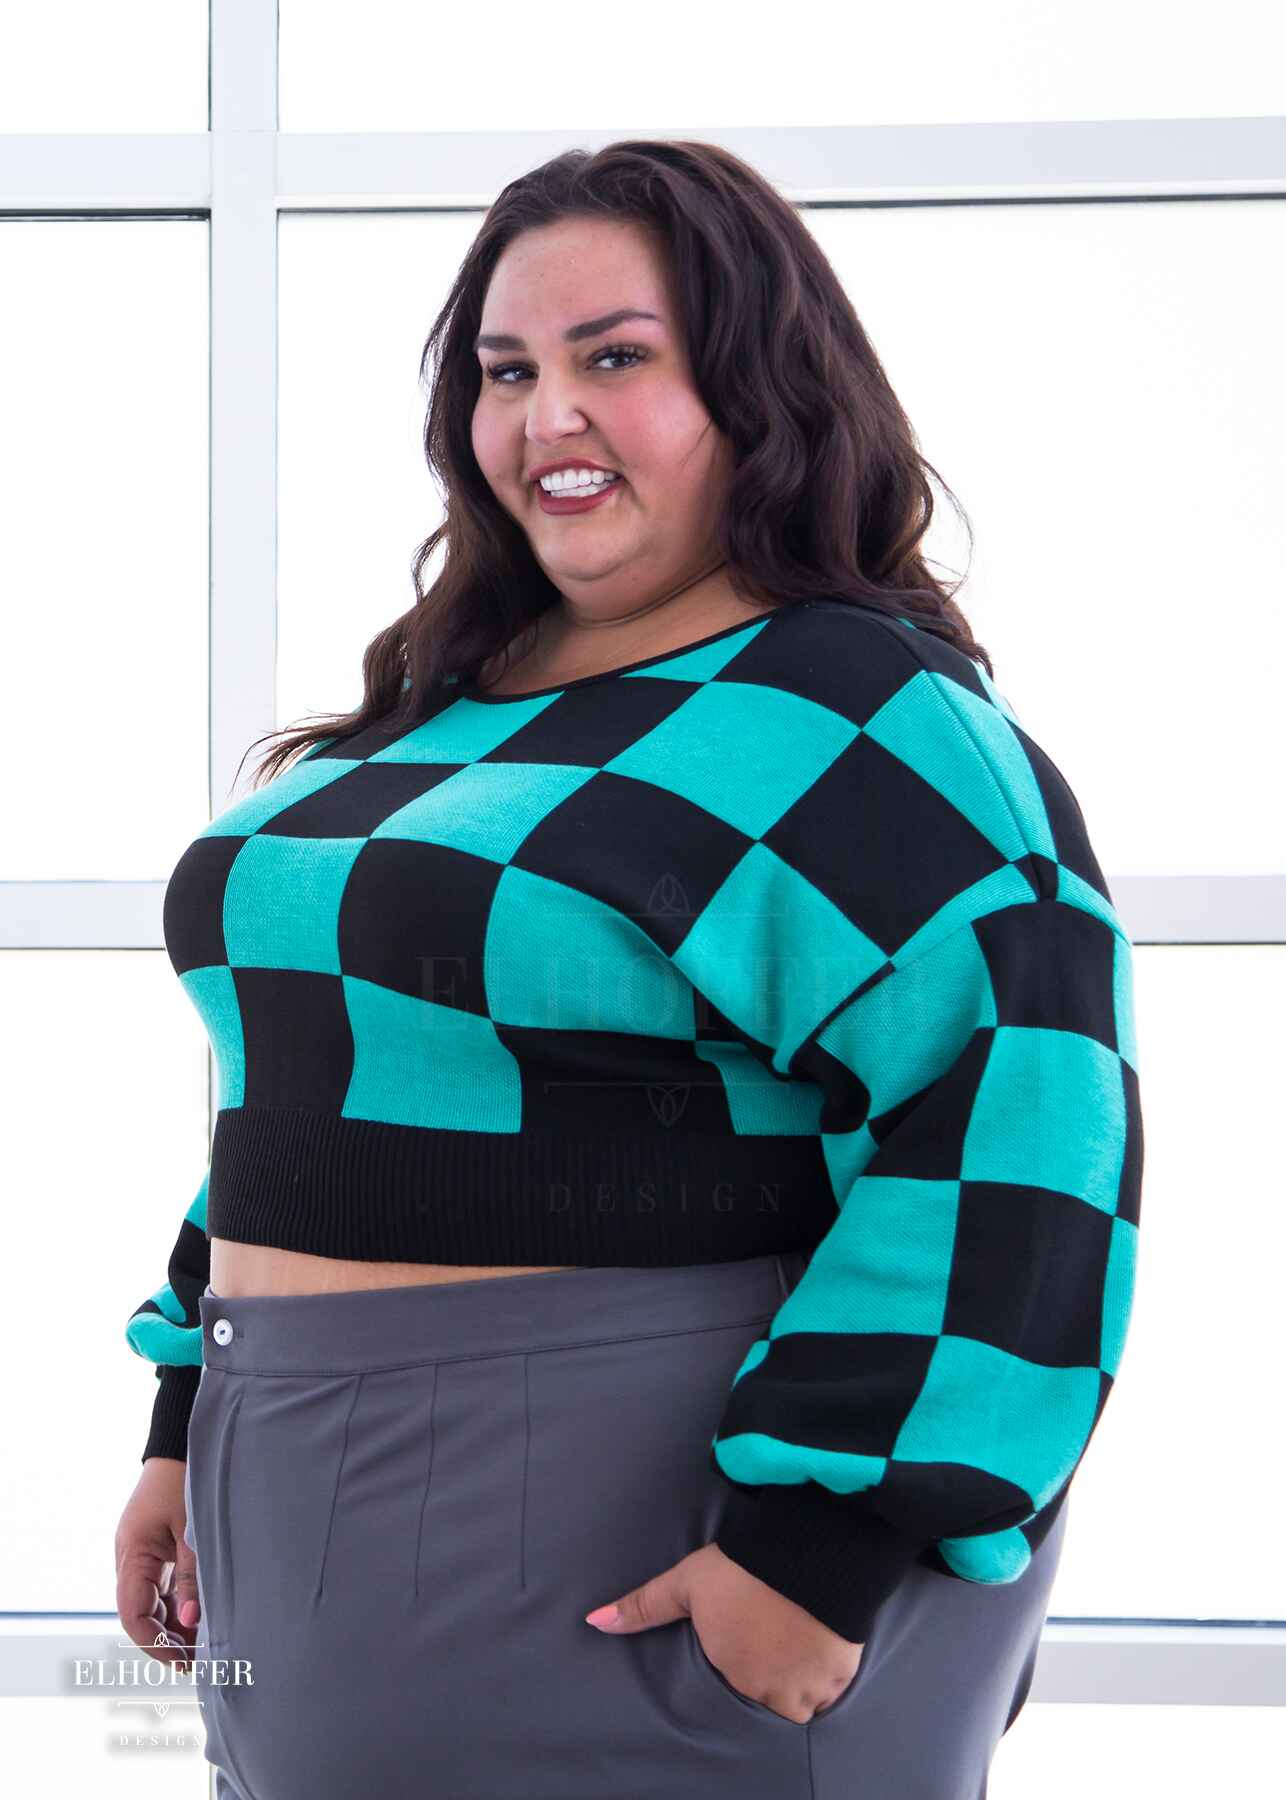 Kristen, a sun kissed skin 3XL model with long dark brown hair, is smiling while wearing a cropped oversize sweater with a black and green chessboard pattern and long billowing sleeves.  She paired the sweater with medium grey wide leg slacks.